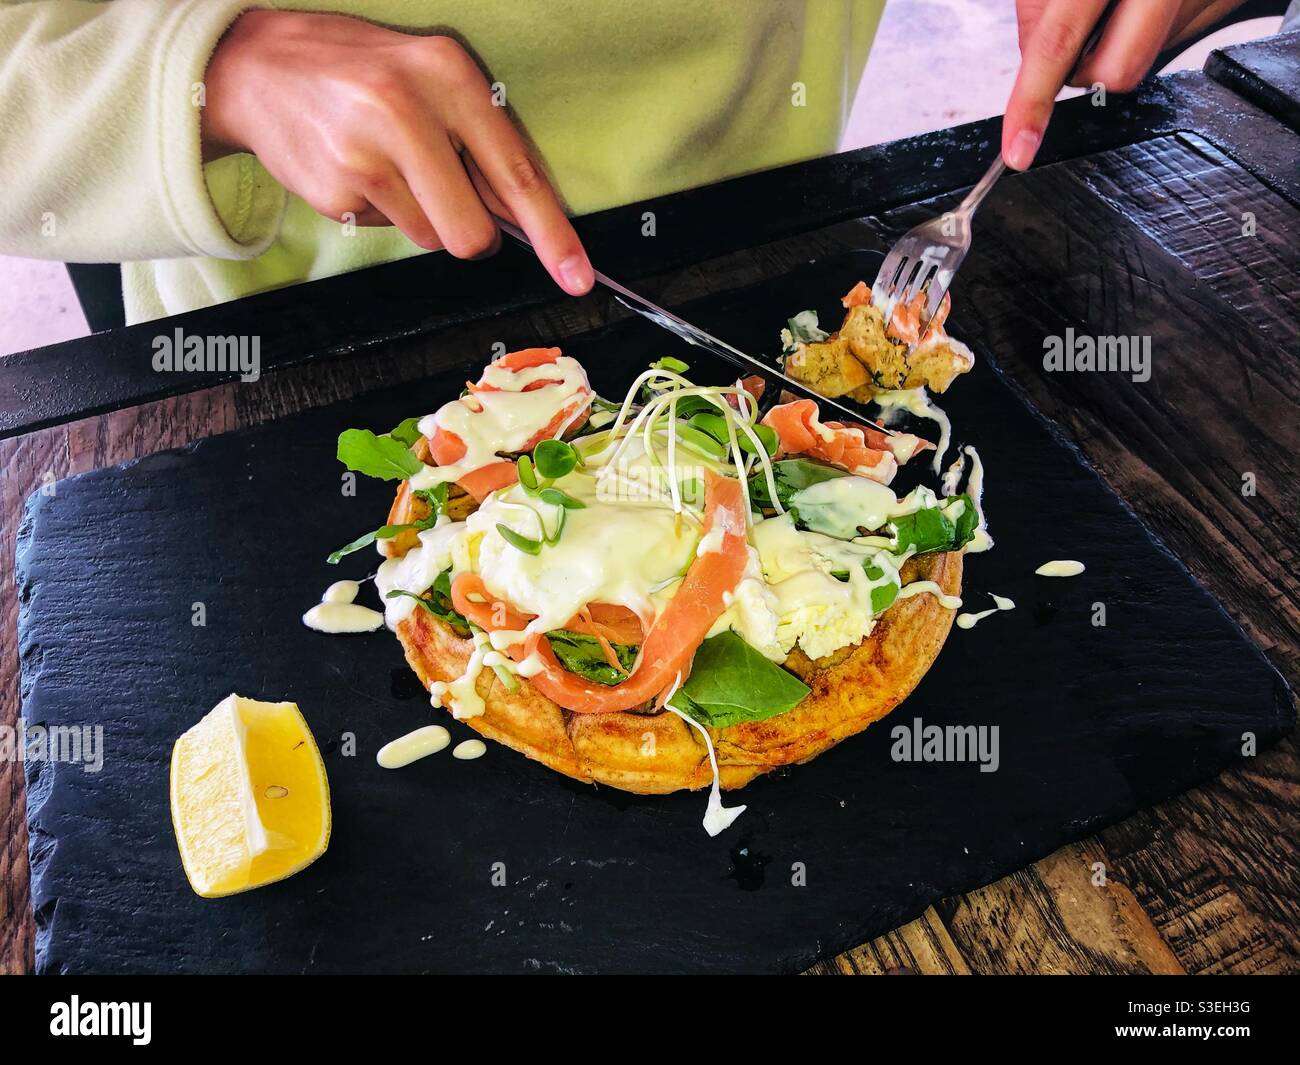 Person eating salmon and poached egg breakfast on a waffle served on a black slate plate Stock Photo